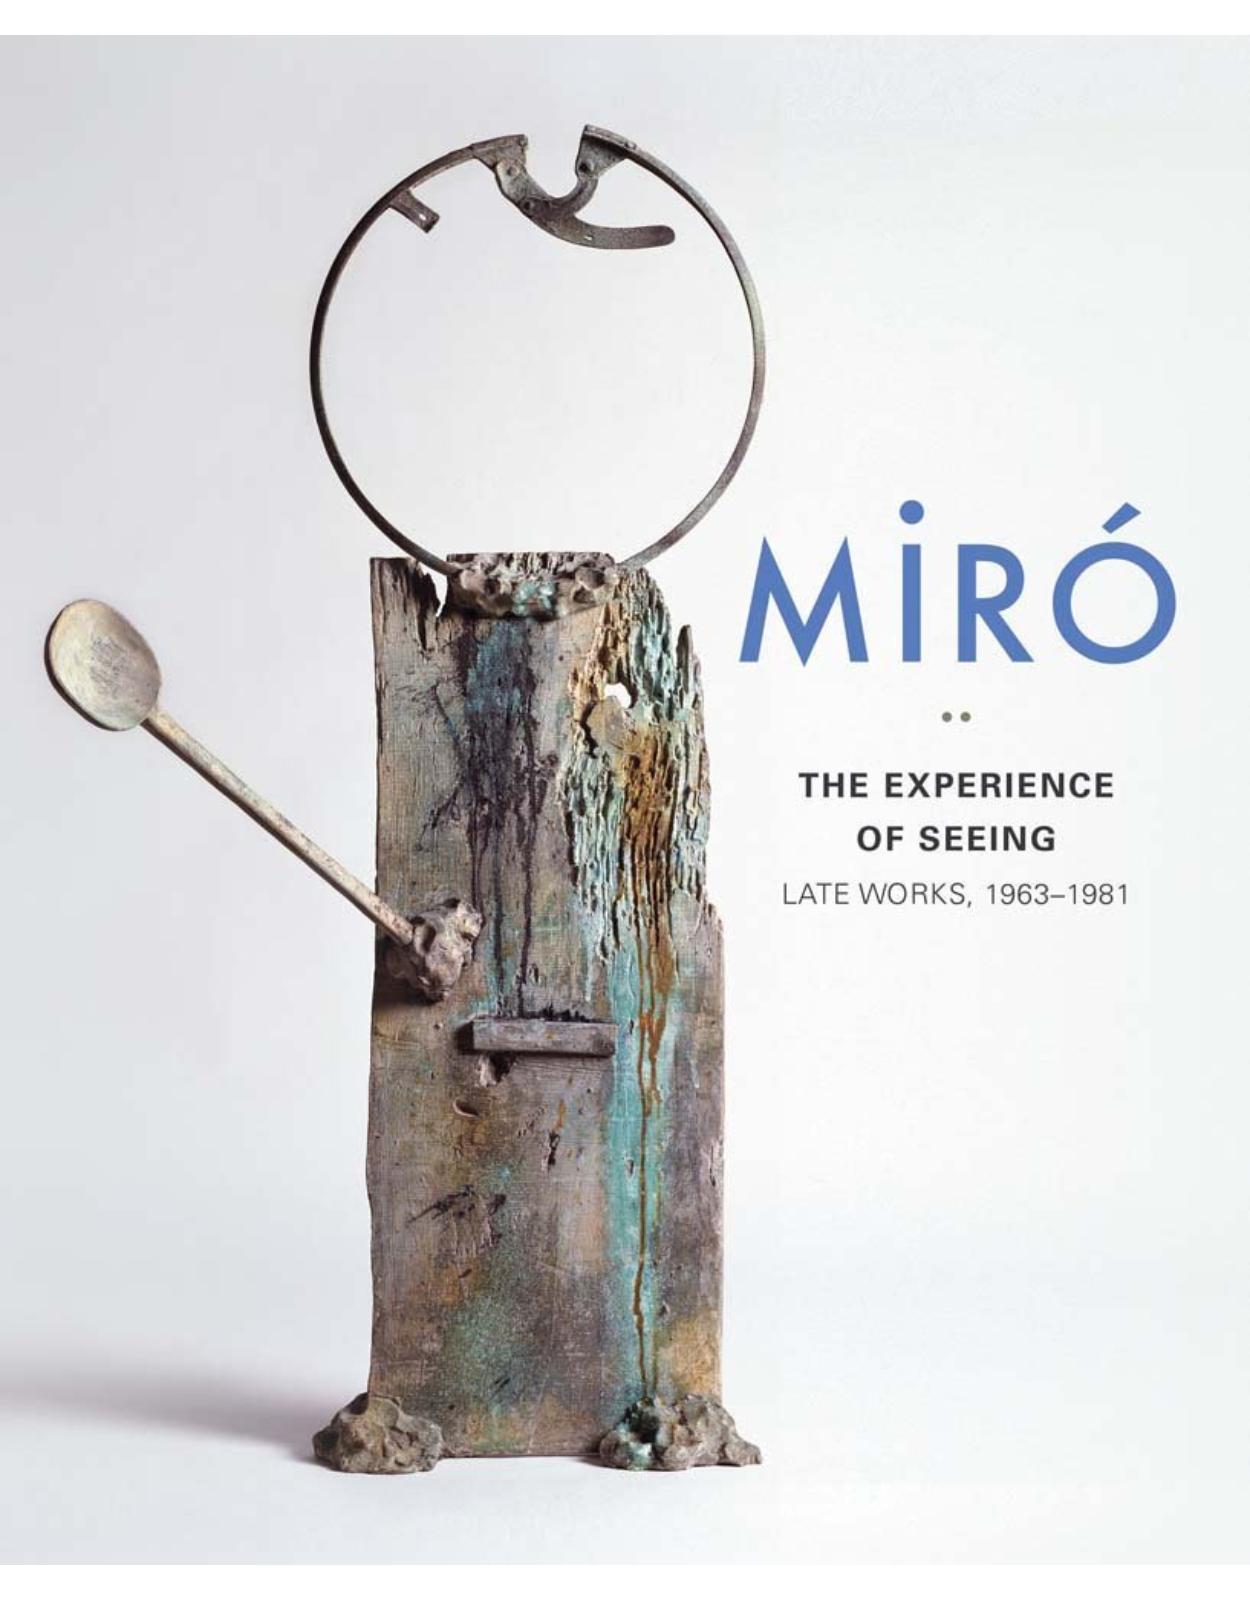 Miro. The Experience of Seeing - Late Works, 1963-1981